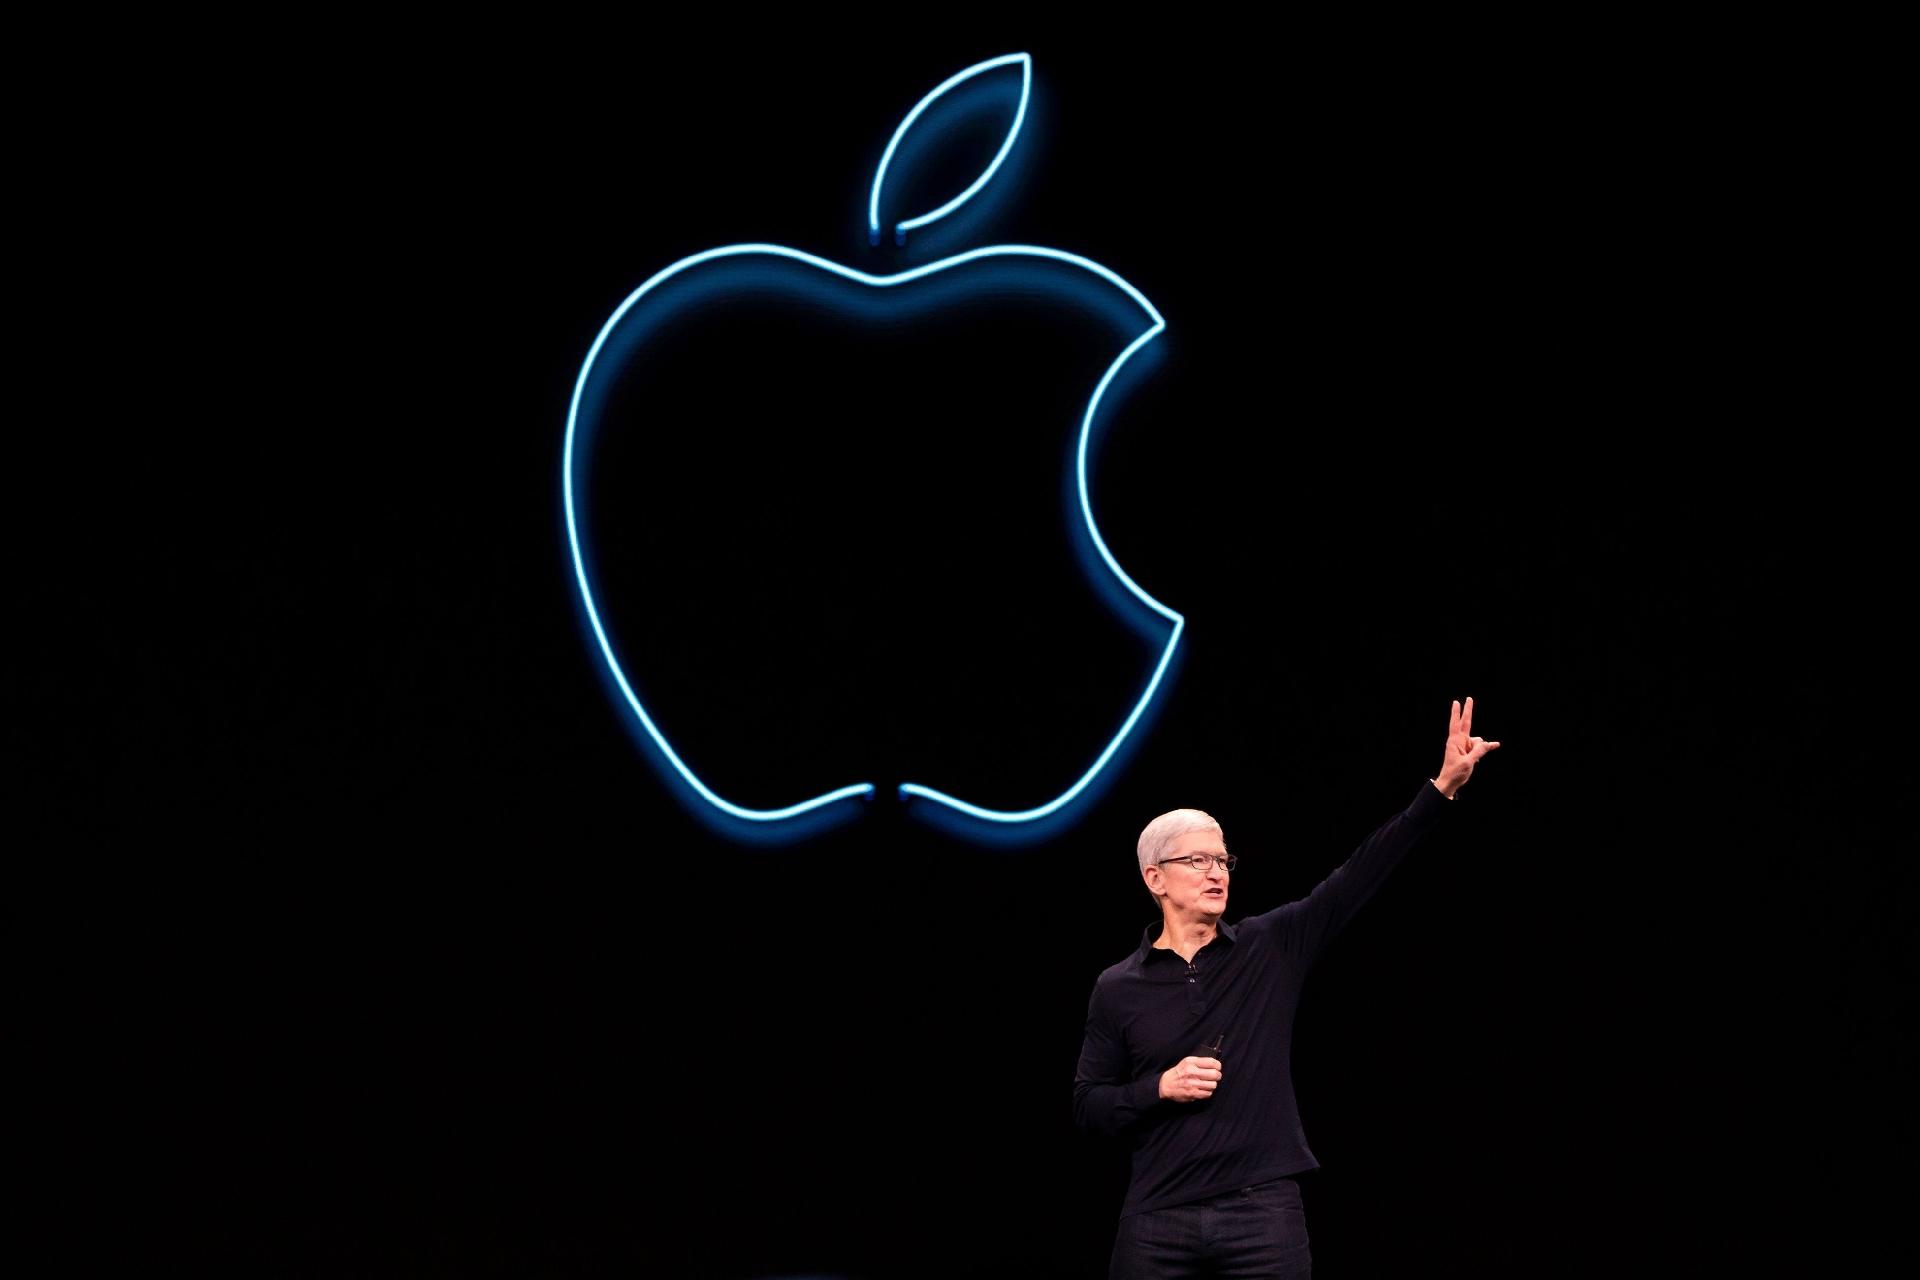 Apple’s total value has exceeded $2 trillion